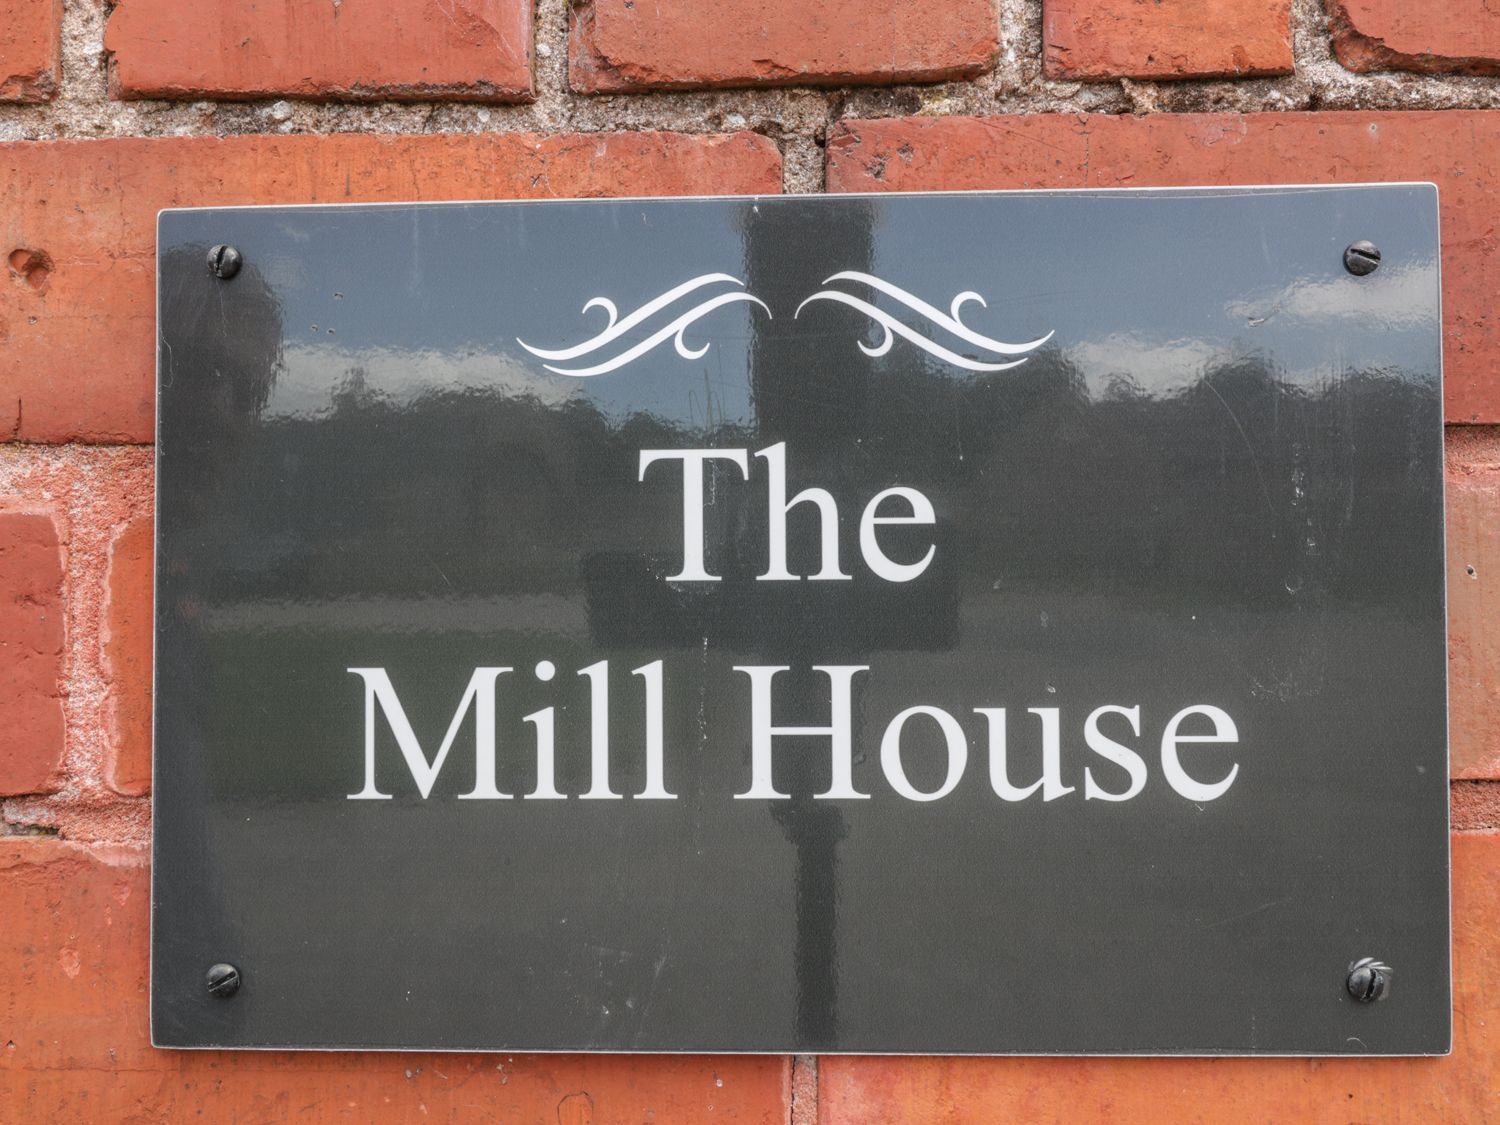 The Mill House, Shropshire